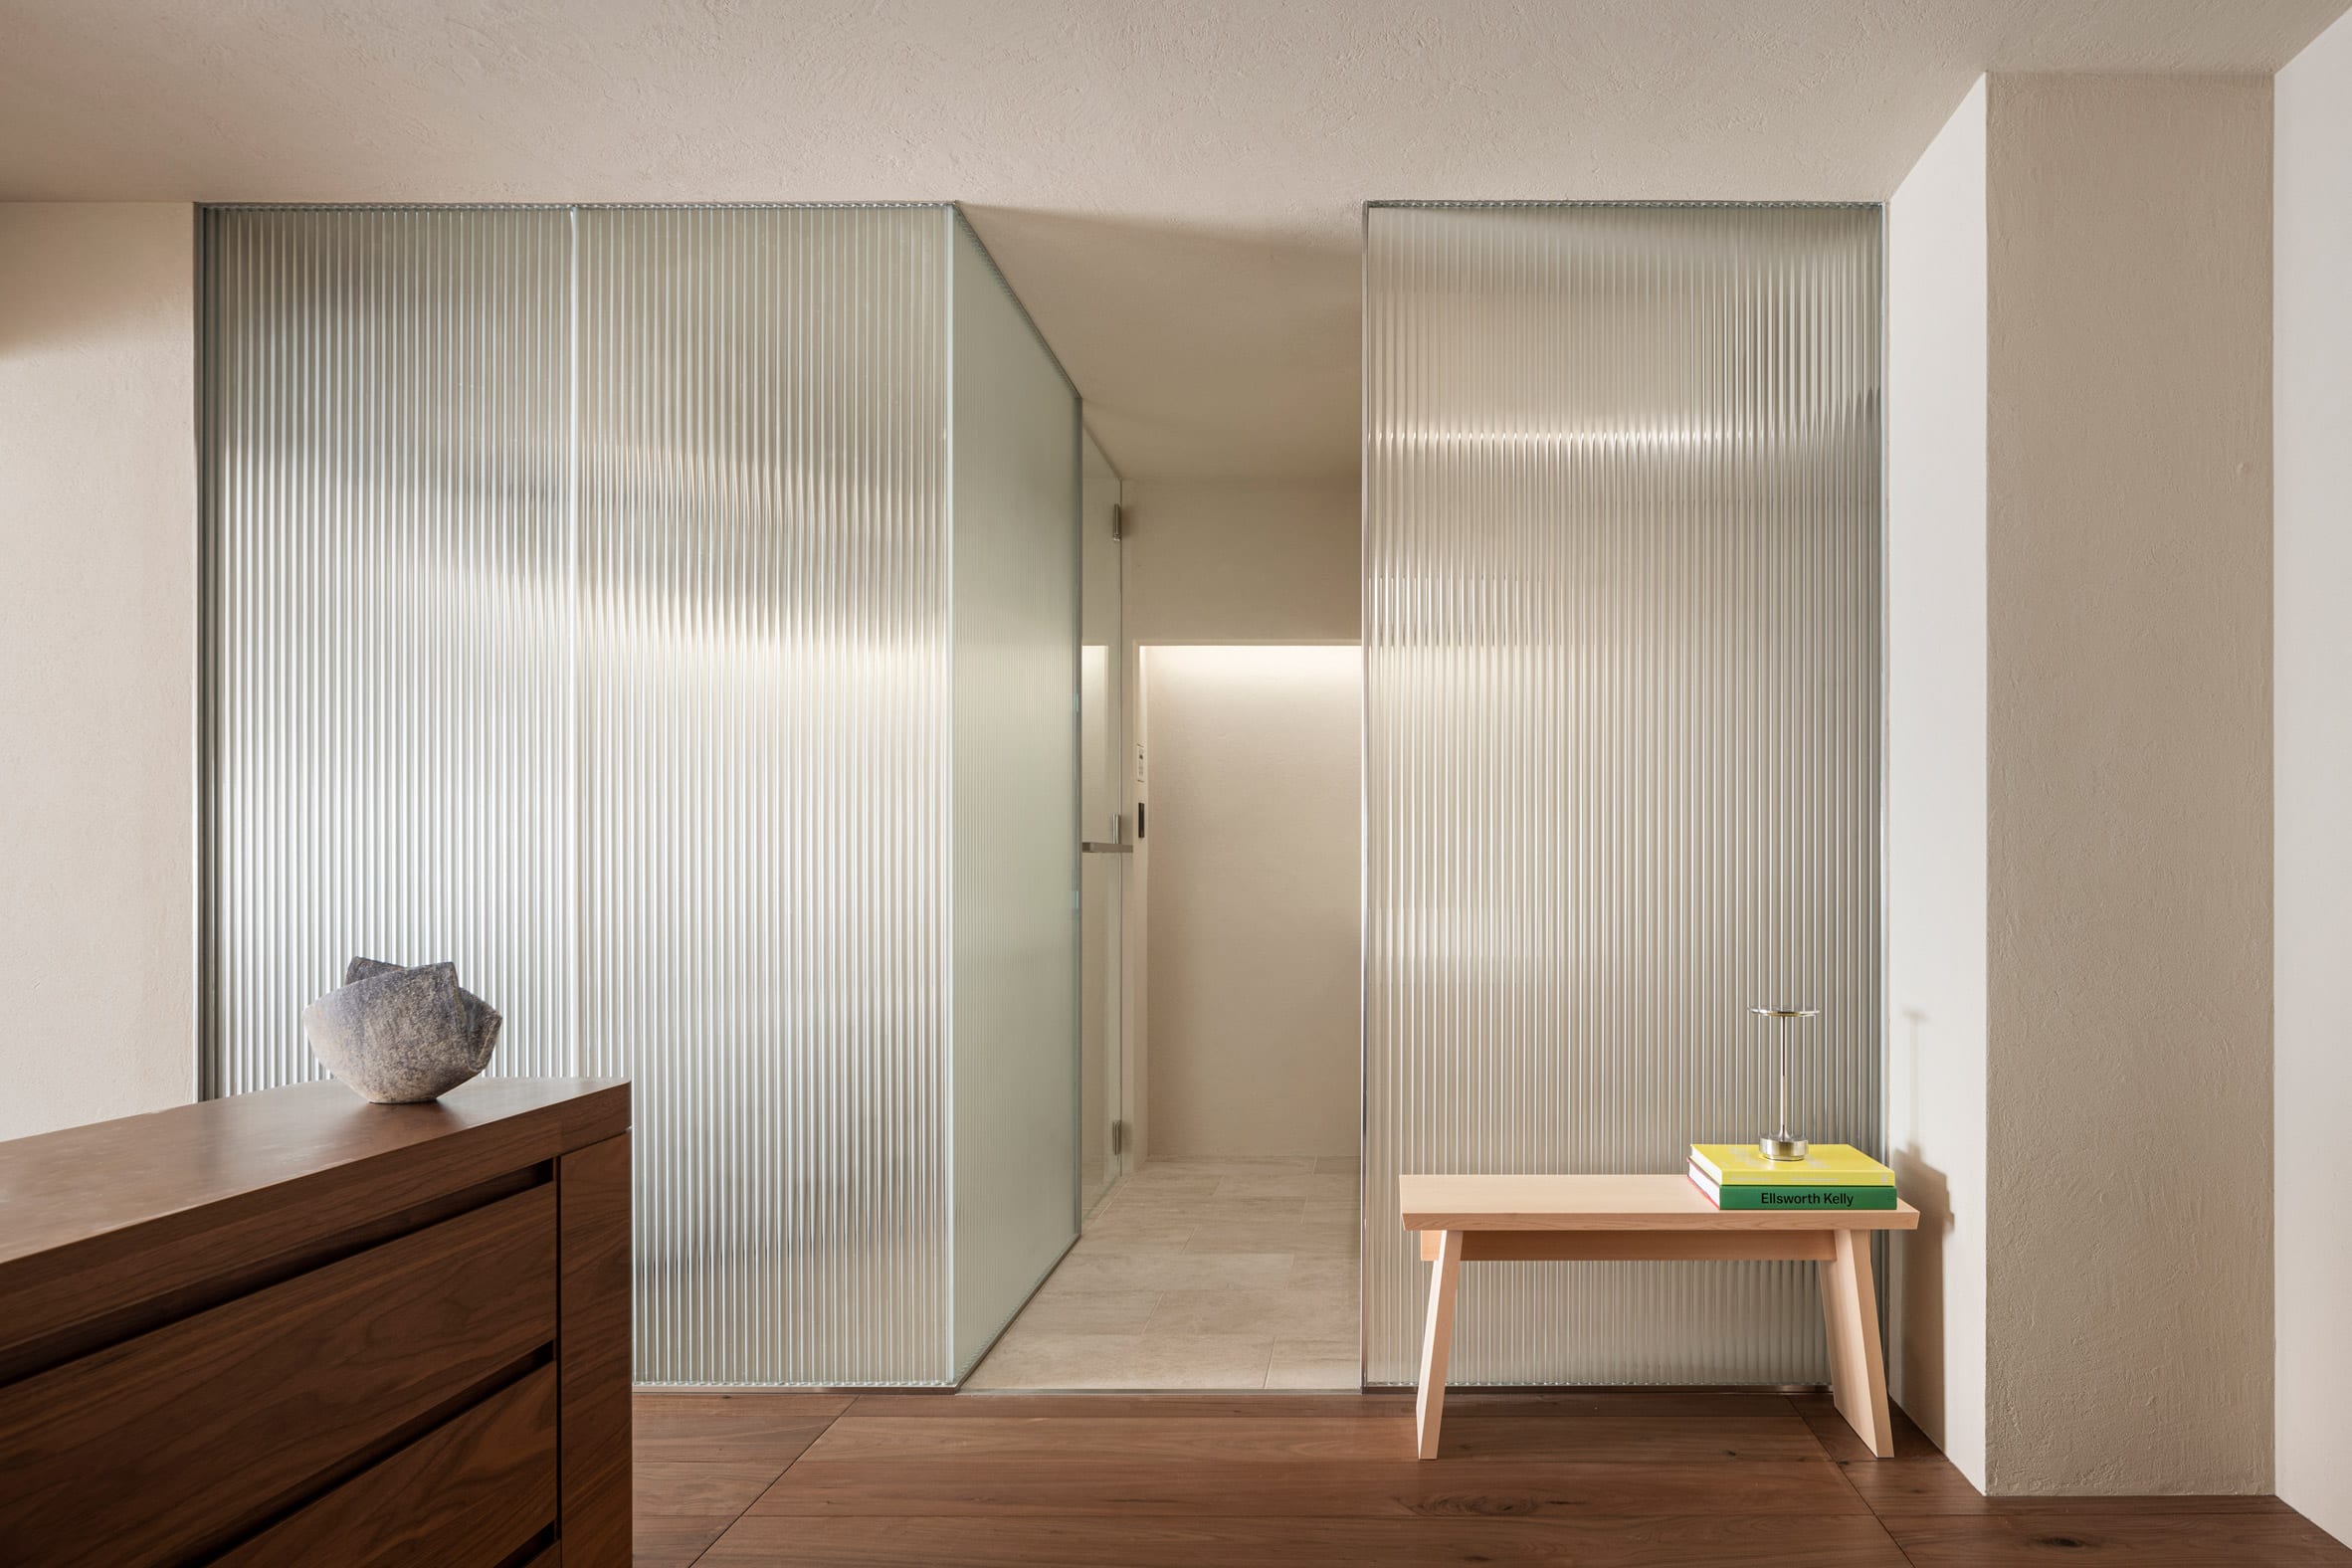 Reeded glass partitions and wood cupboard in The Life concept apartment